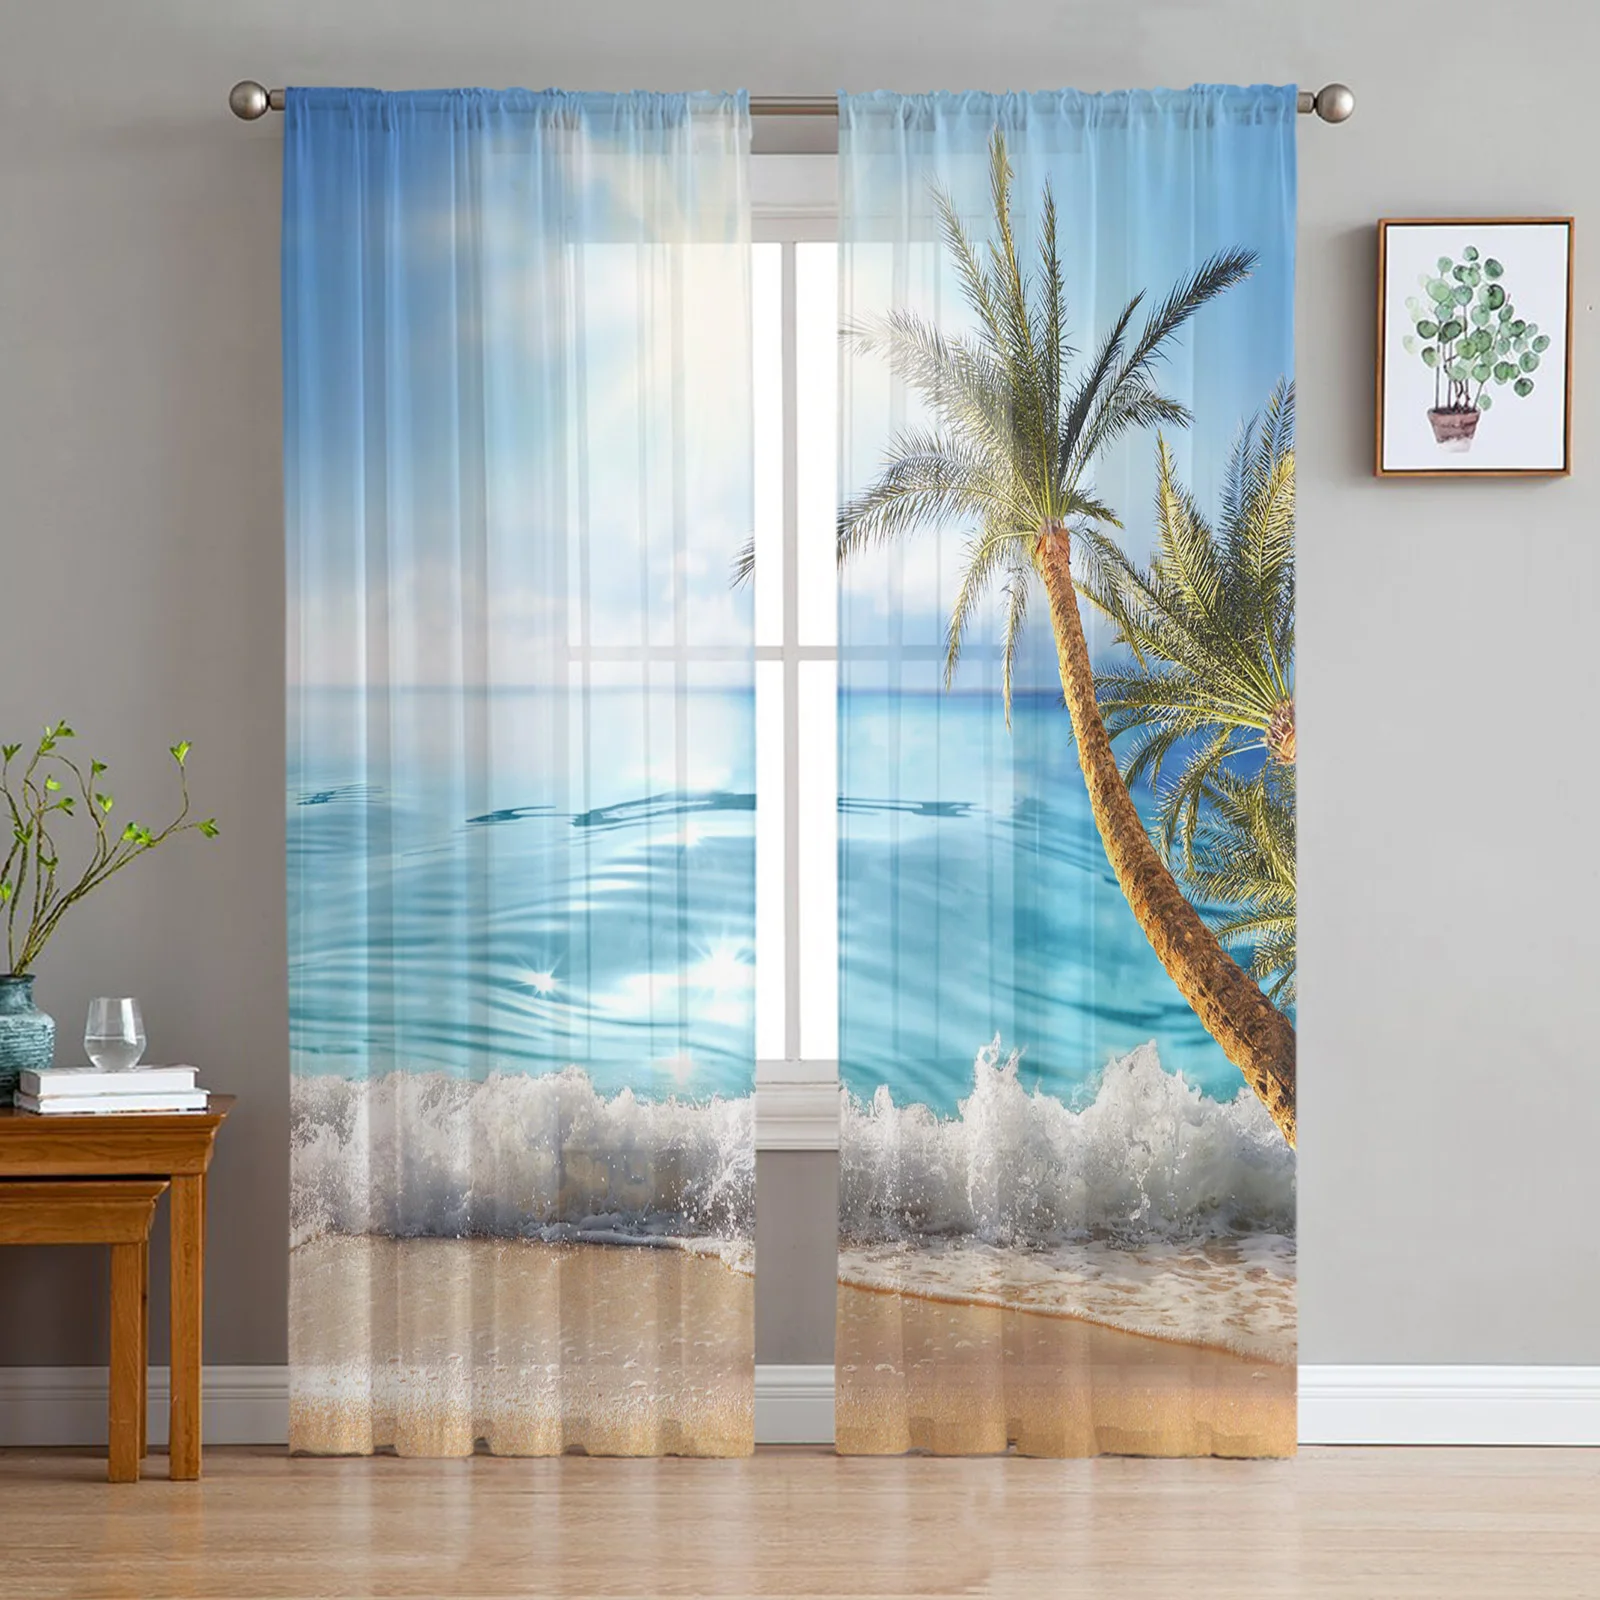 

Beach Waves Coconut Trees Tulle Sheer Window Curtains for Living Room the Bedroom Voile Organza Decorative Curtains Drapes